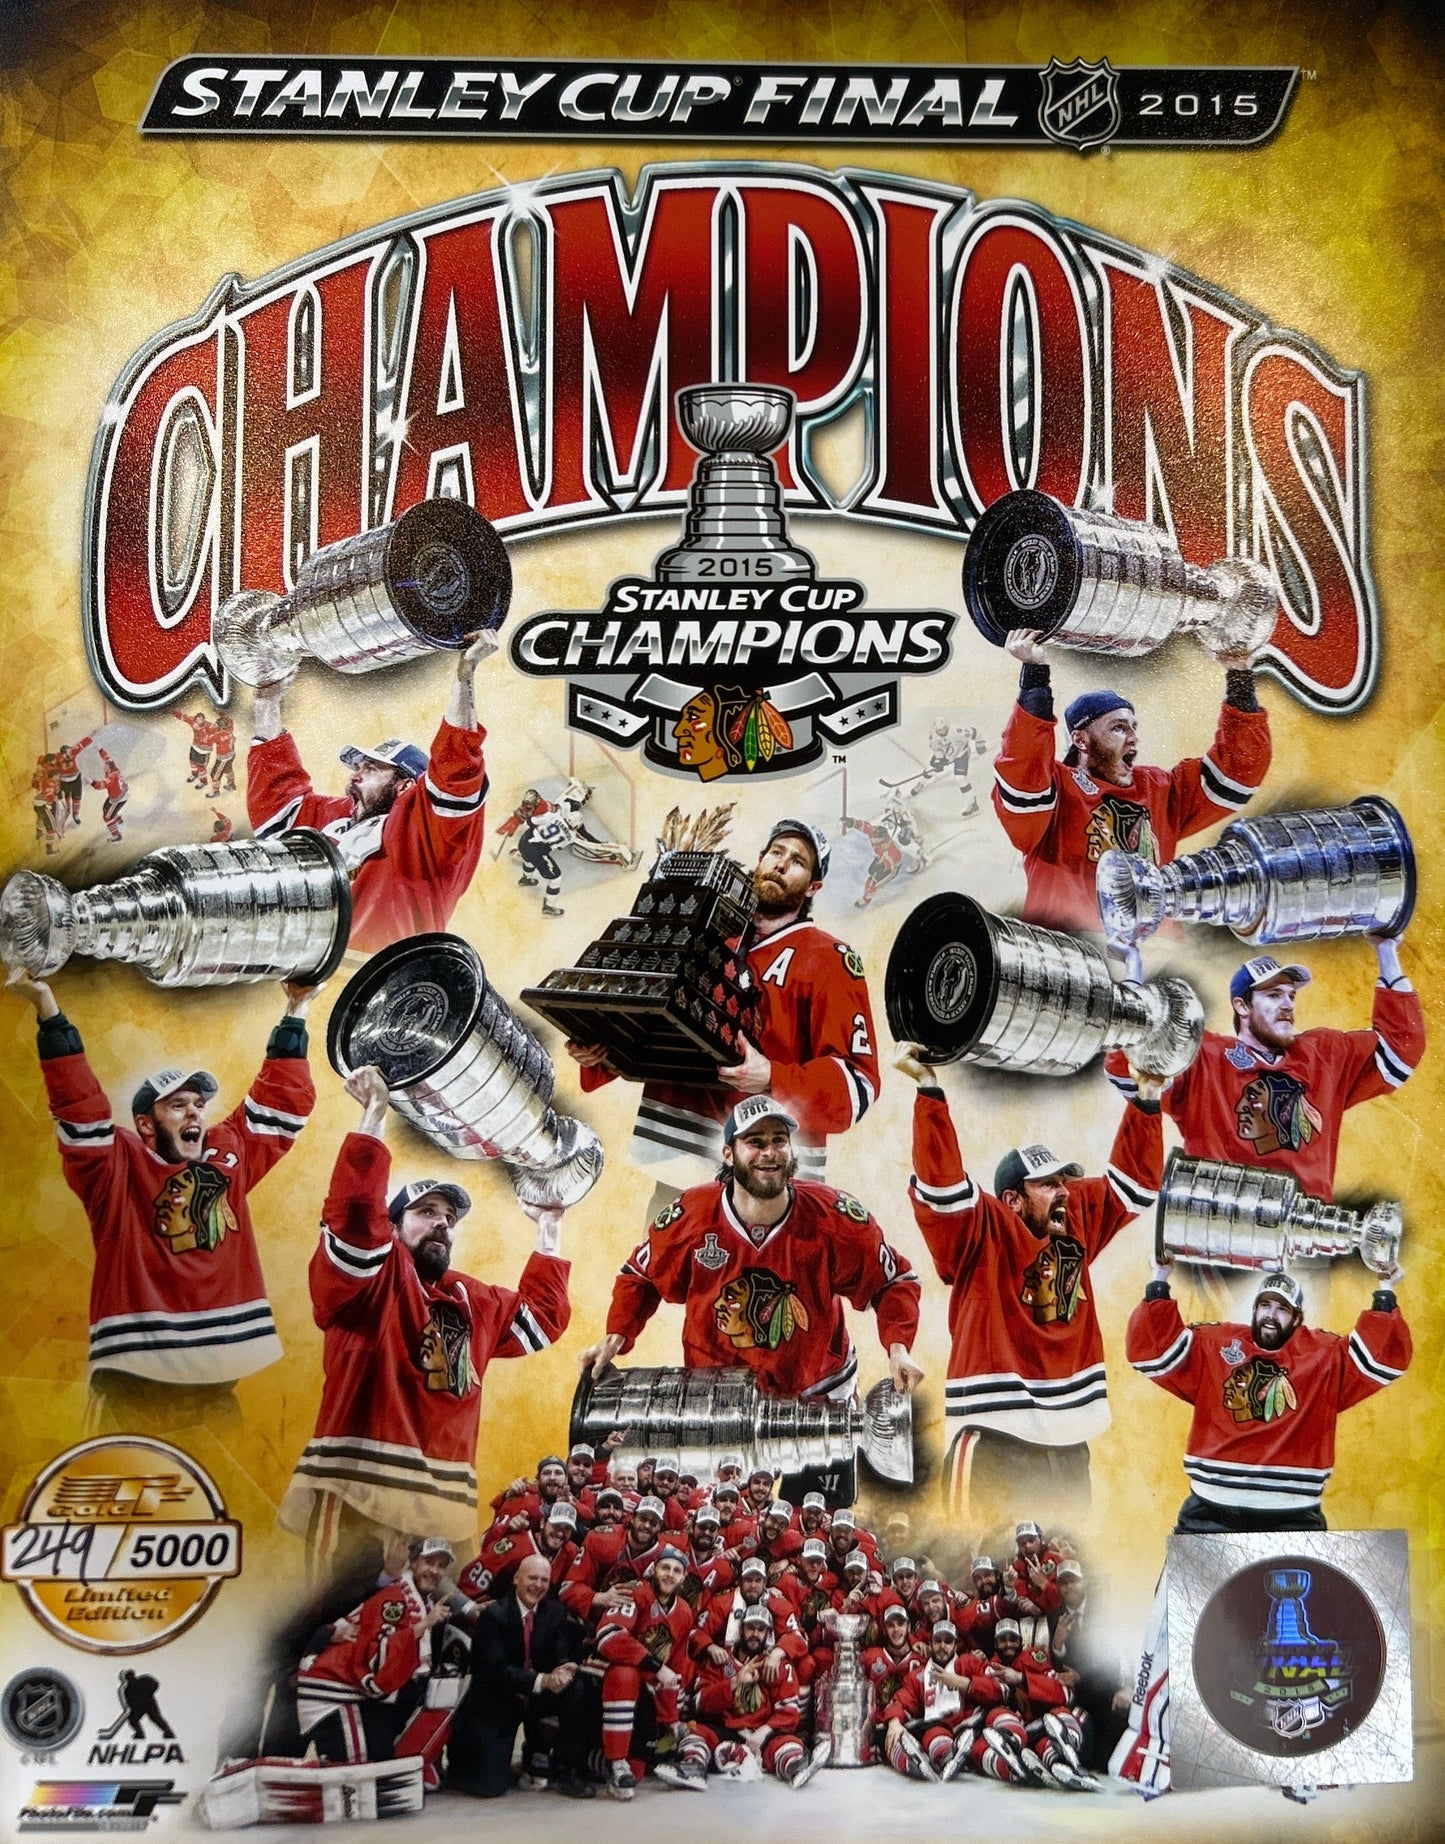 Chicago Blackhawks 2015 Stanley Cup Champions Limited Print Team Collage Photo (8X10)